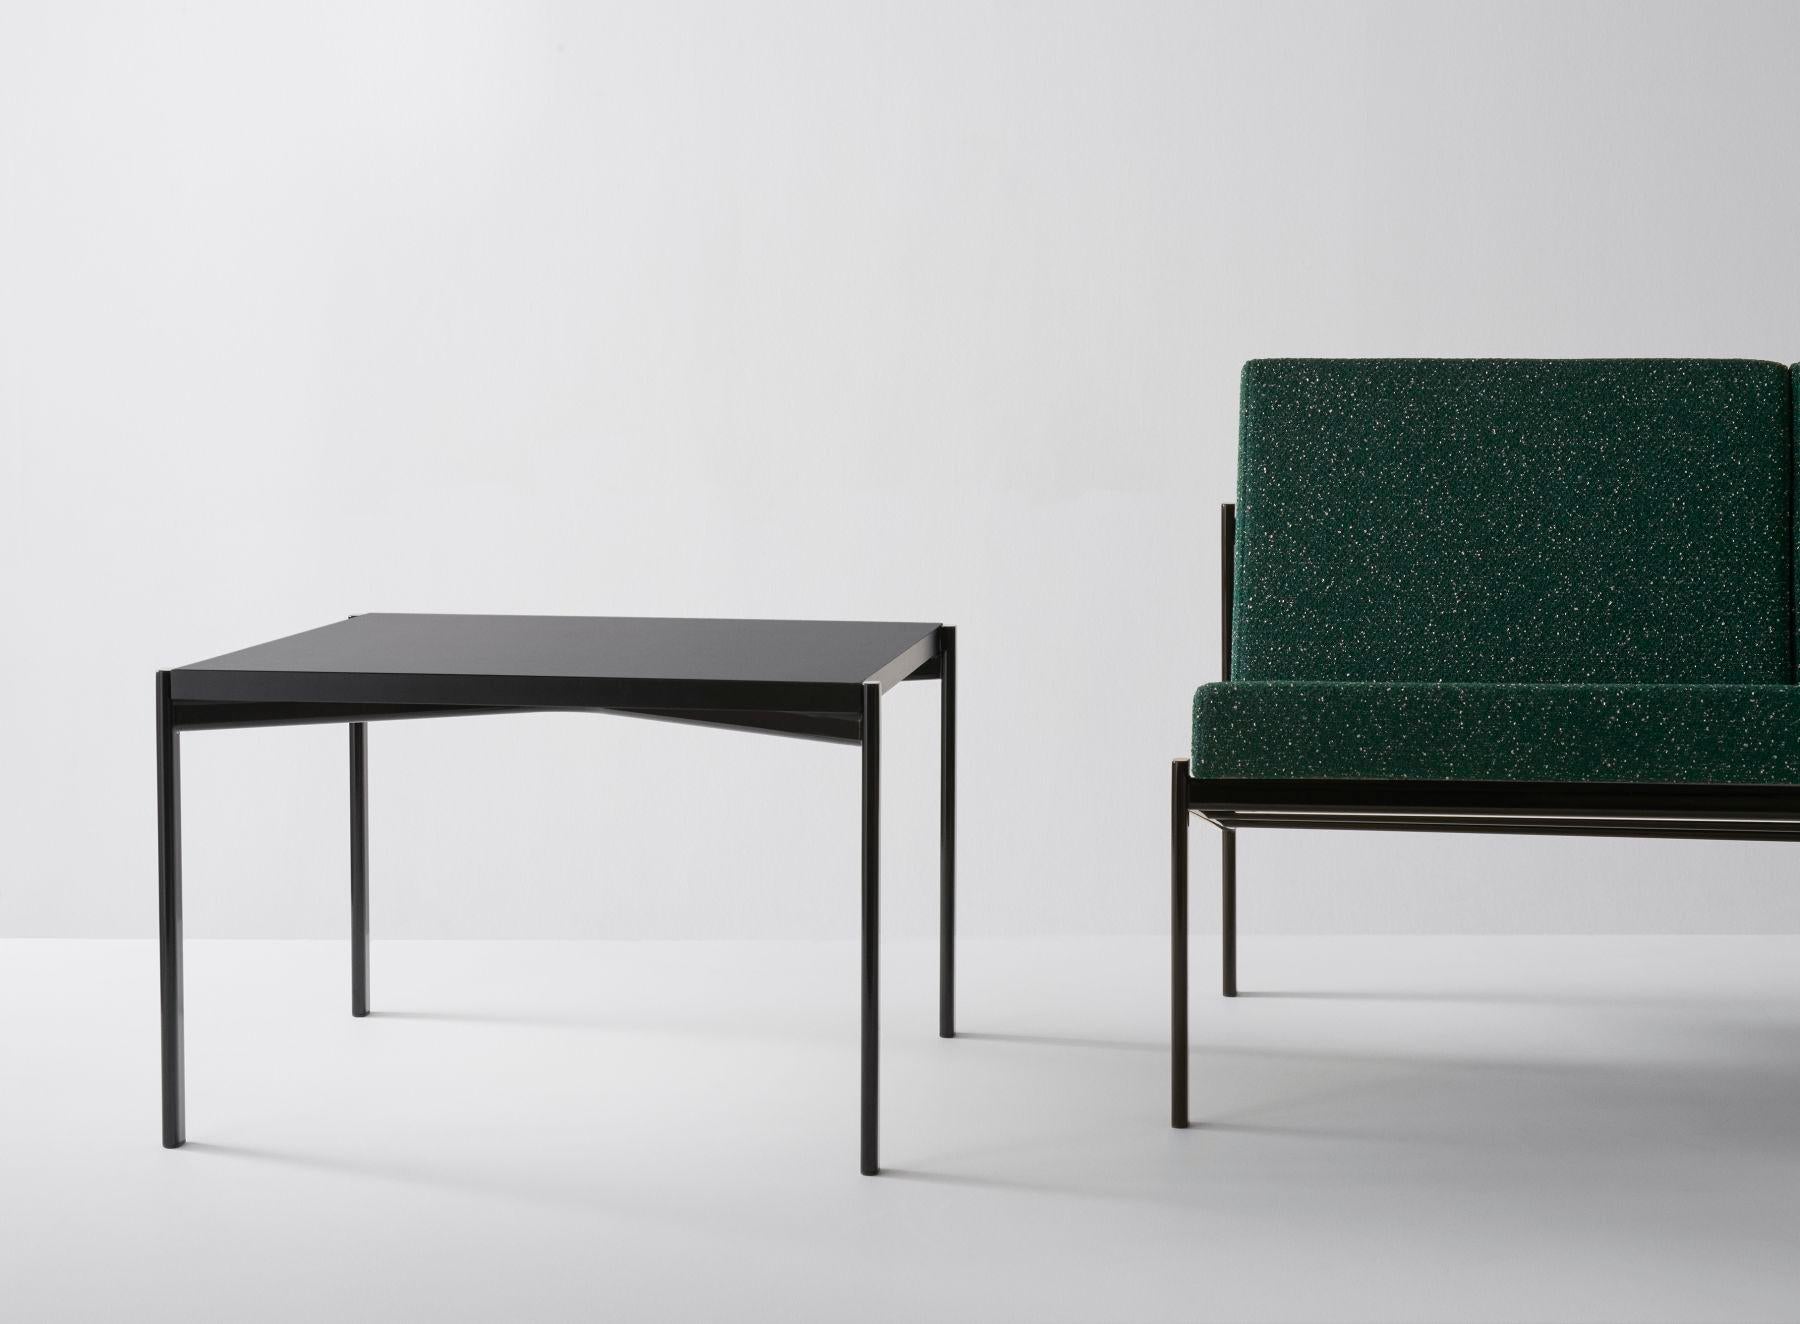 Authentic Kiki rectangle occasional table by Imari Tapiovaara & Artek. The Kiki occasional table is available as a small side table as and a larger version that serves as a sofa table. Introducing oval instead of circular tubes, Ilmari Tapiovaara